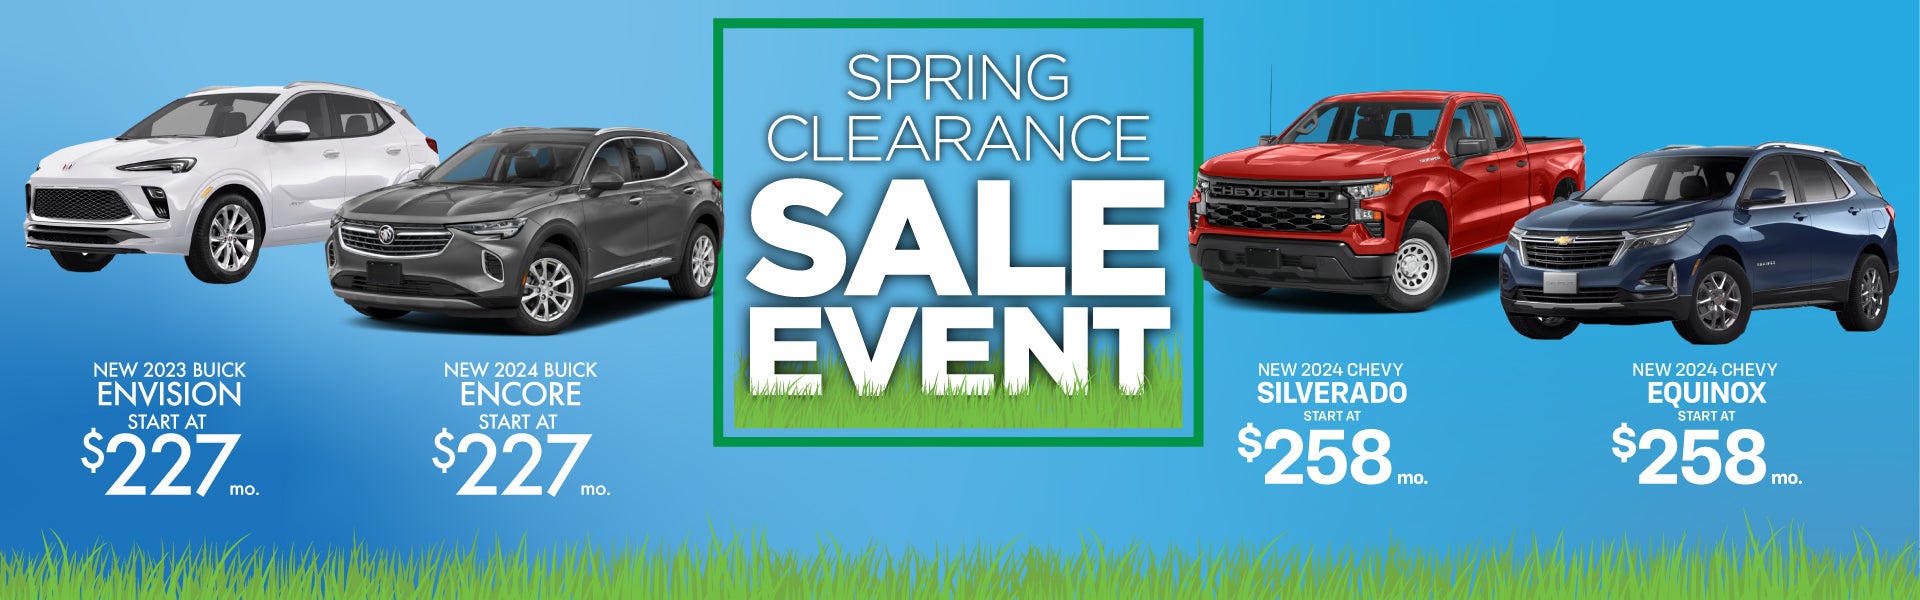 Spring Clearance Event